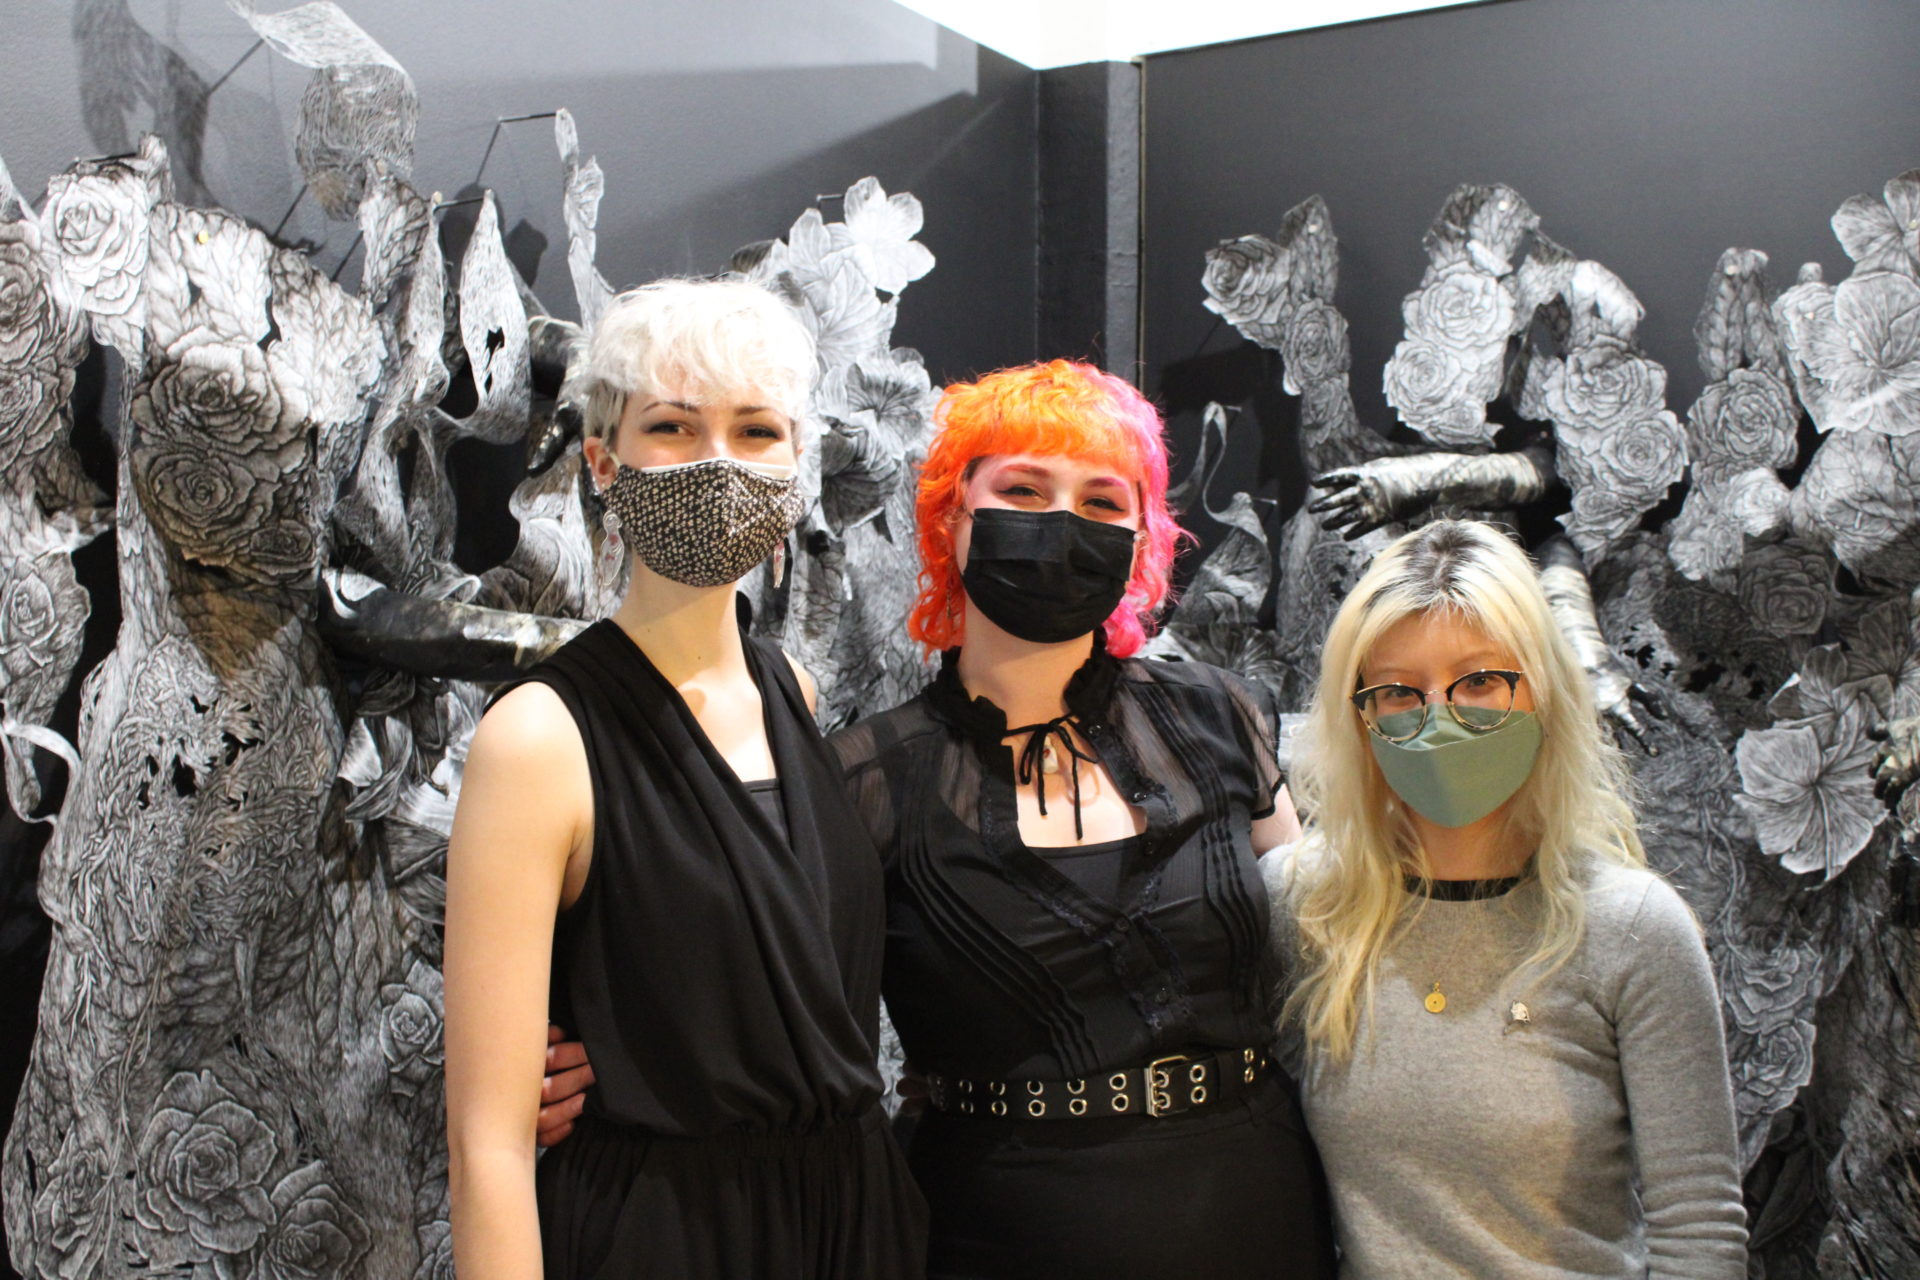 Artists Leah Huskey, Gillian Marwood, Raeleen Kao (from left to right)